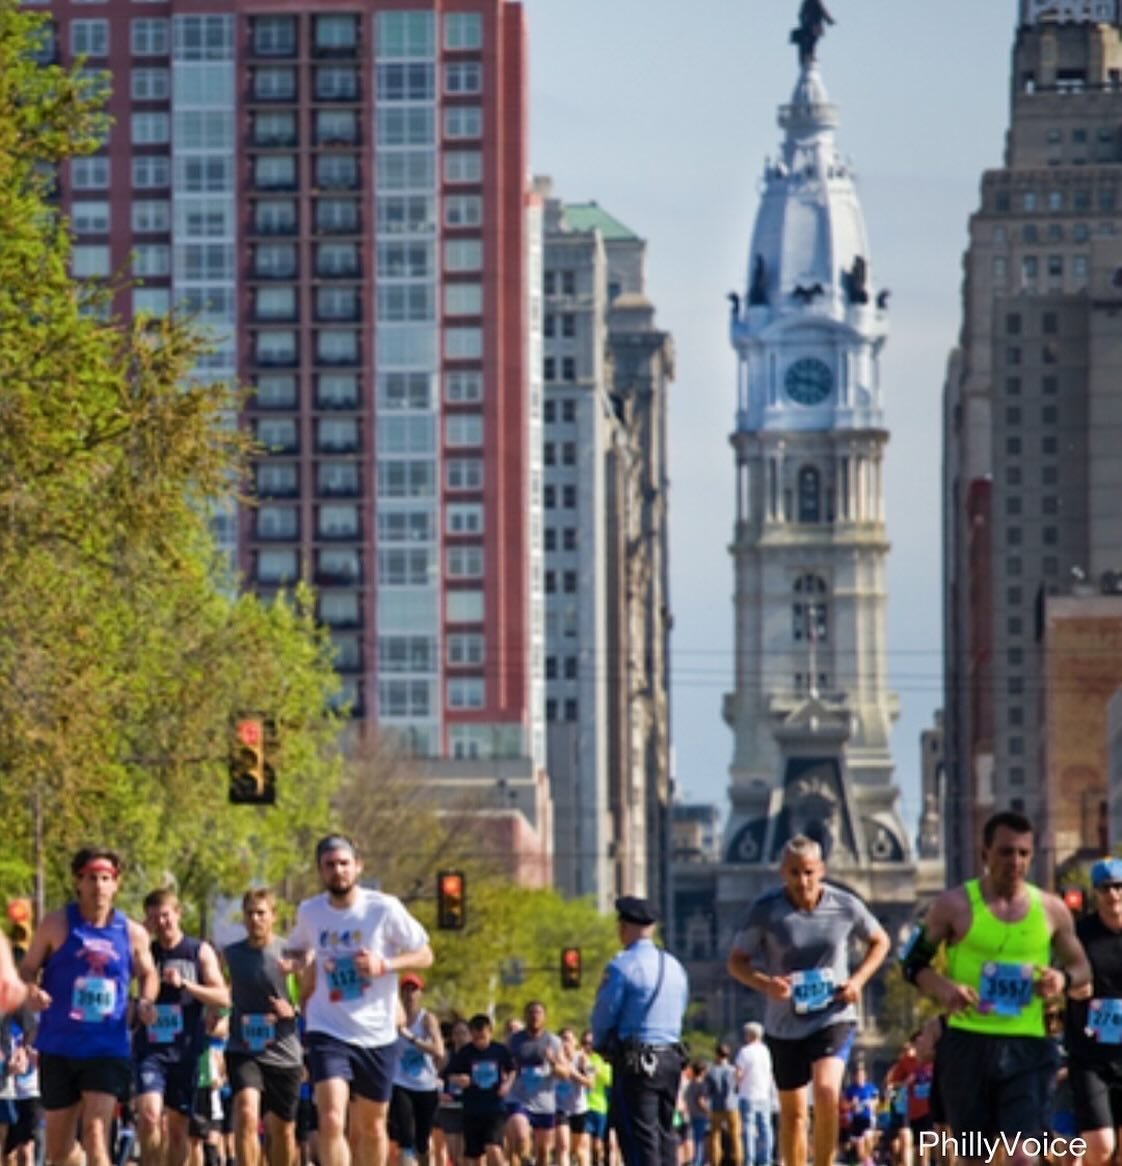 CALLING ALL BROAD ST RUNNERS &mdash; Get a free class on us this week! 

If you ran in Philly&rsquo;s Broad Street Run @ibxrun10, bring your bib and run to Yoga Habit to take a complimentary free class the week of May 5th - May 11th!

Take a class to